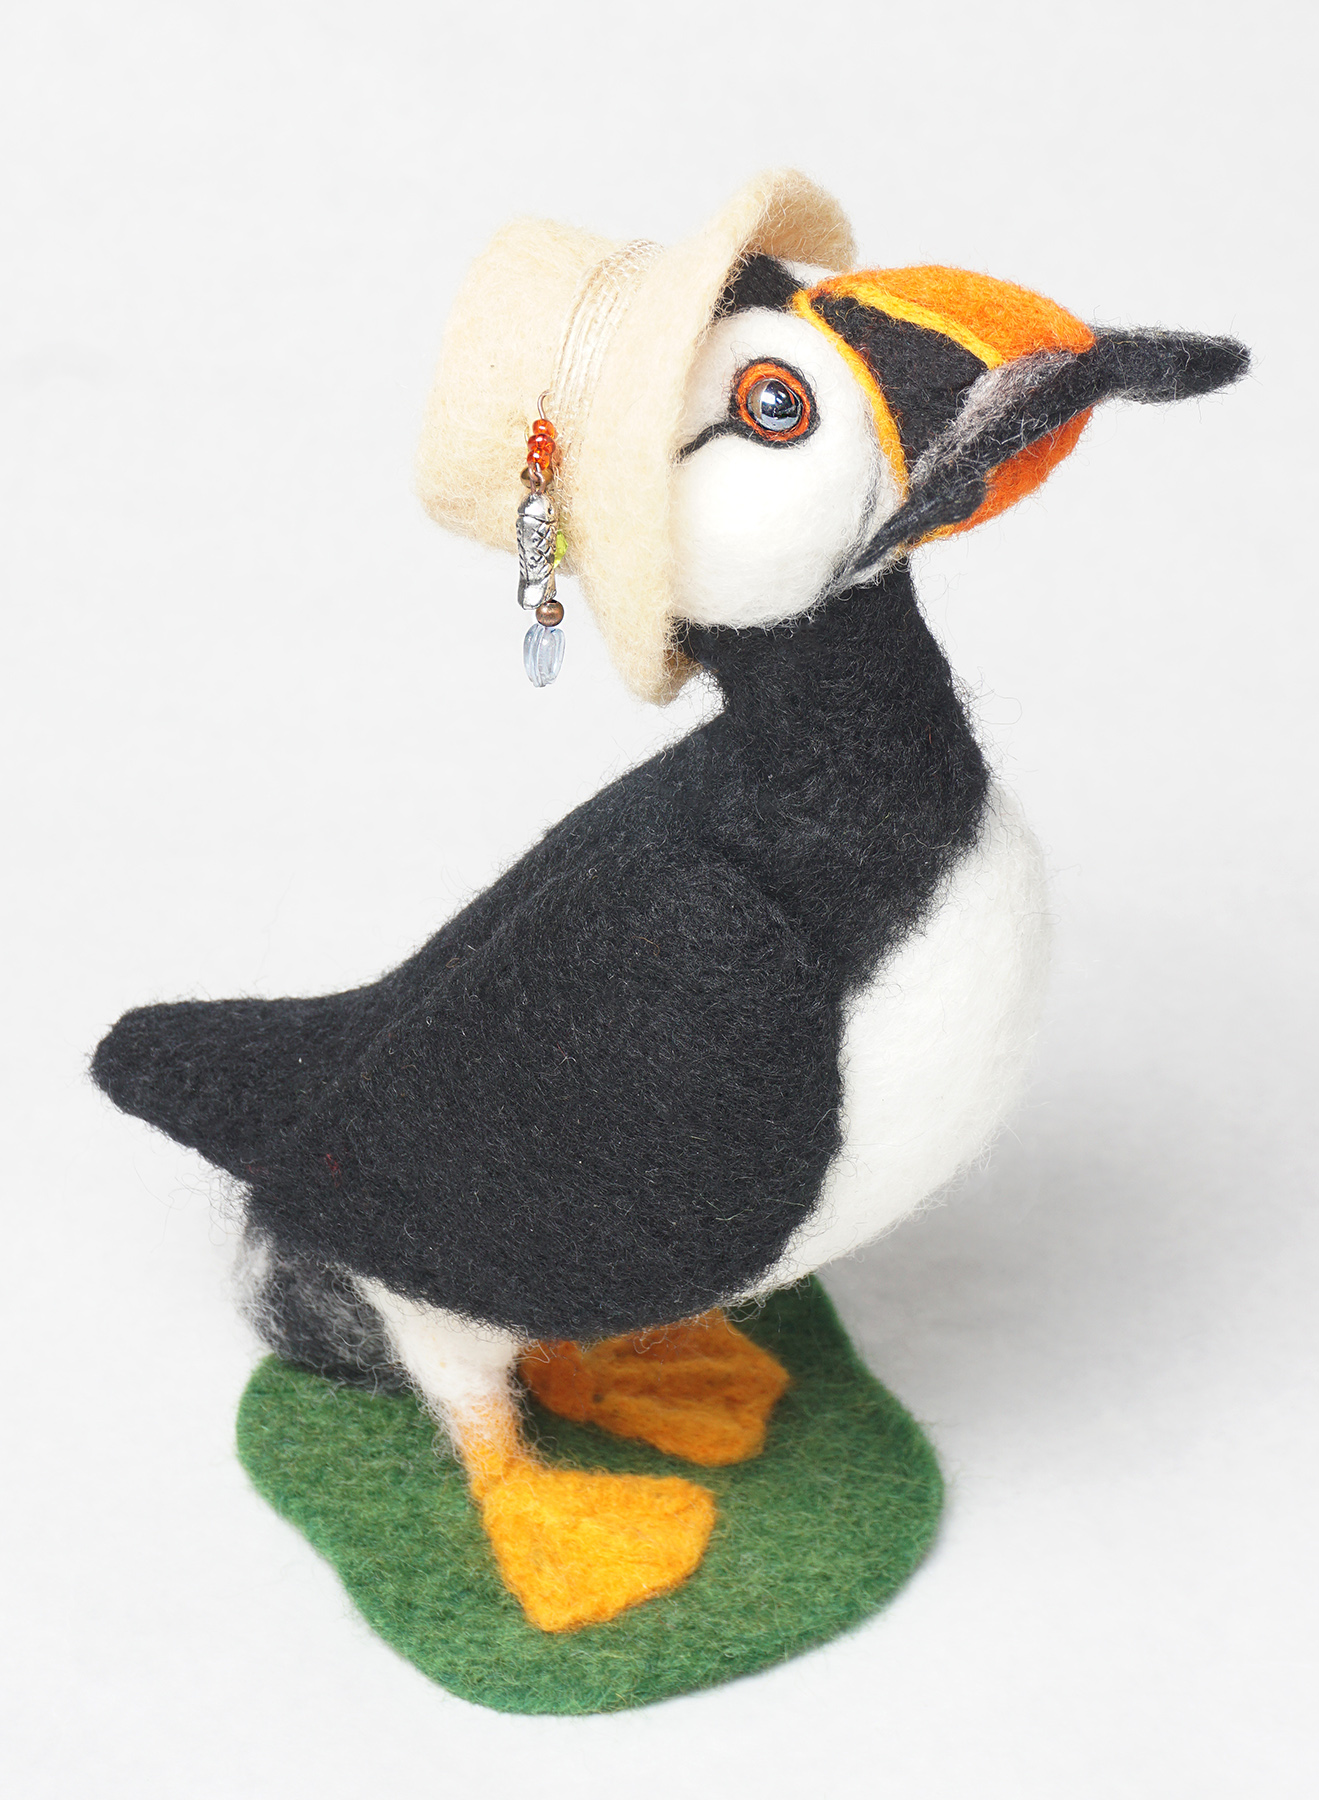 Proud Fisherman, anthropomorphic puffin sculpture art doll, needle felted wool